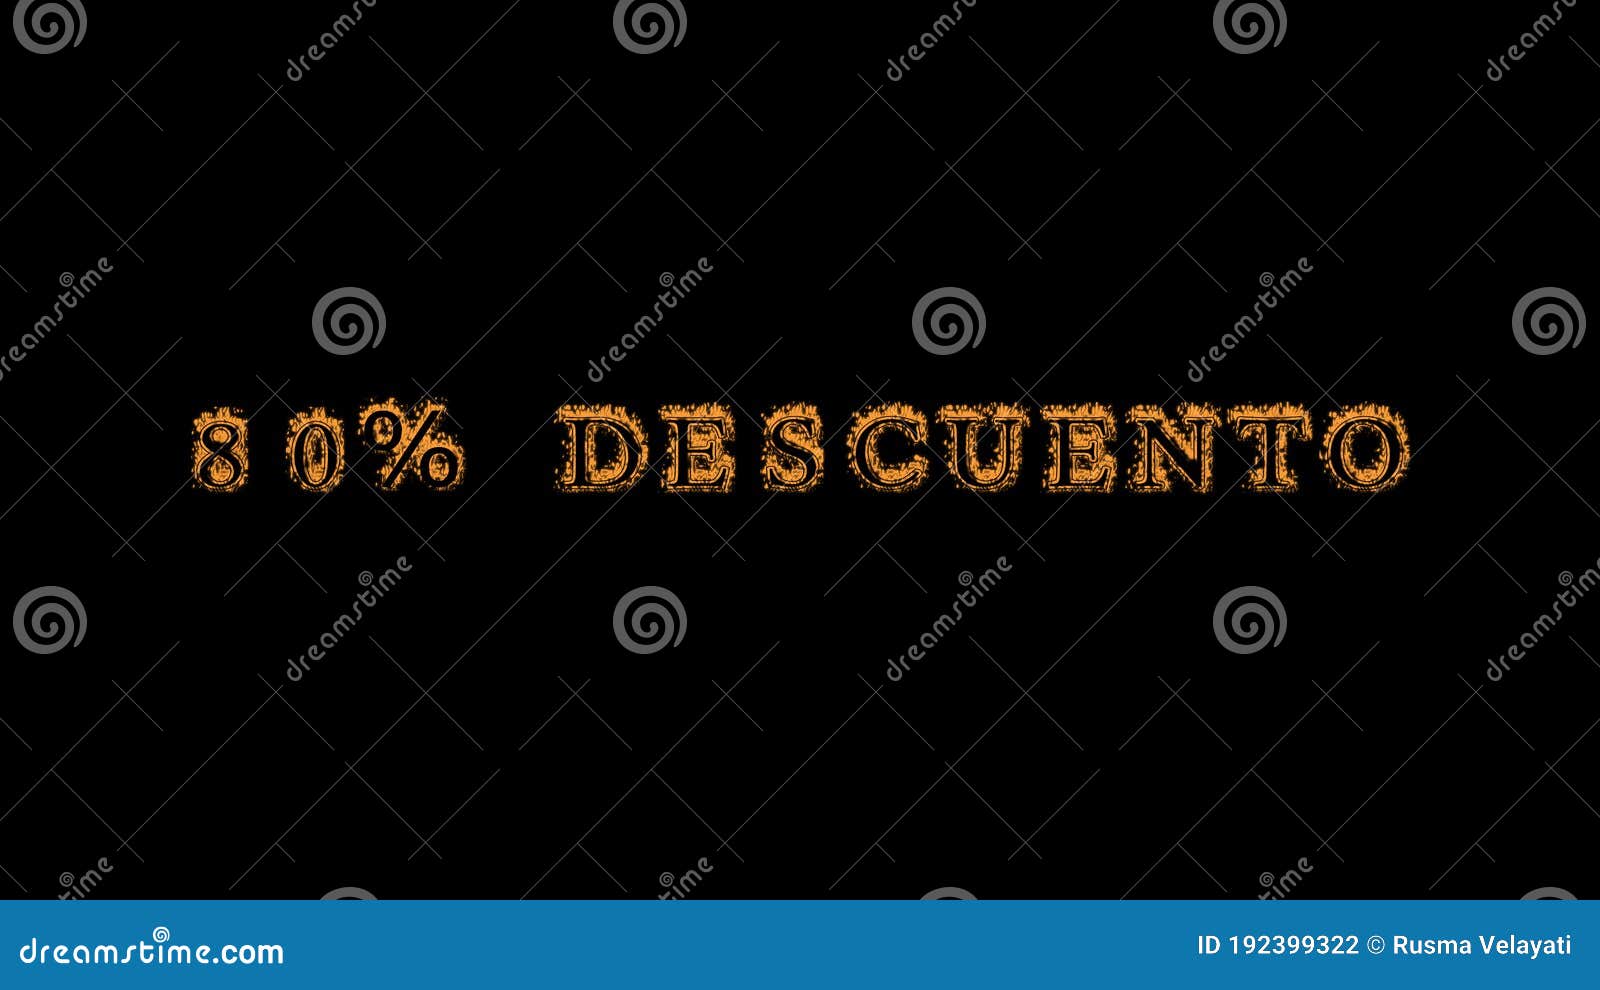 80% descuento fire text effect black background